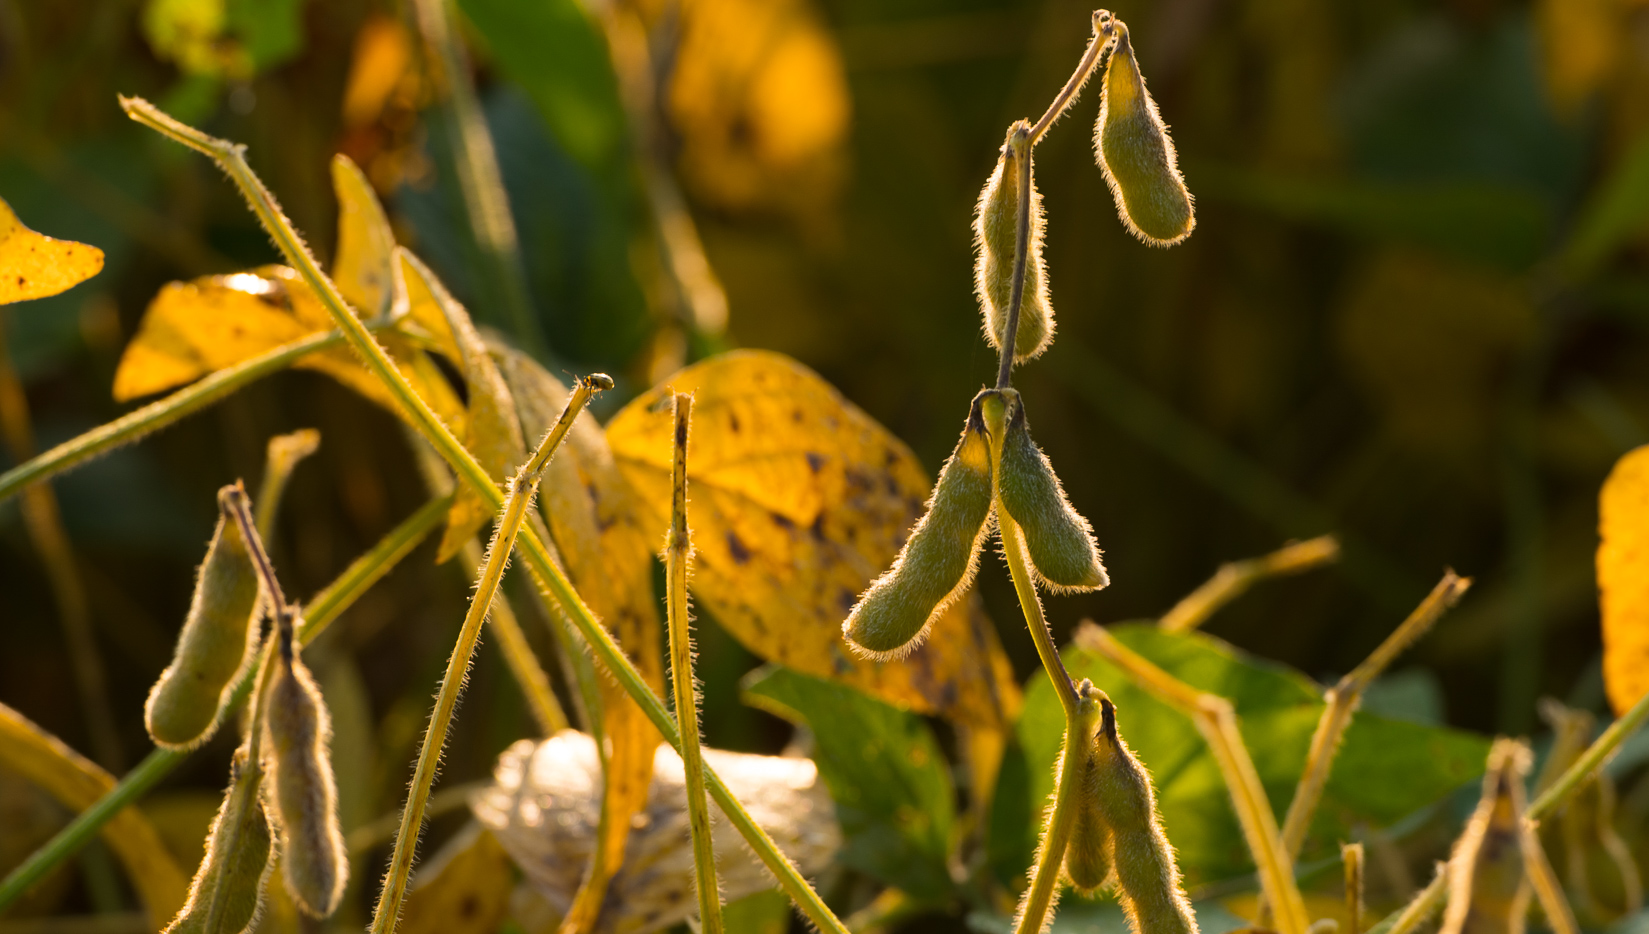 Soybean pods hang from their stems